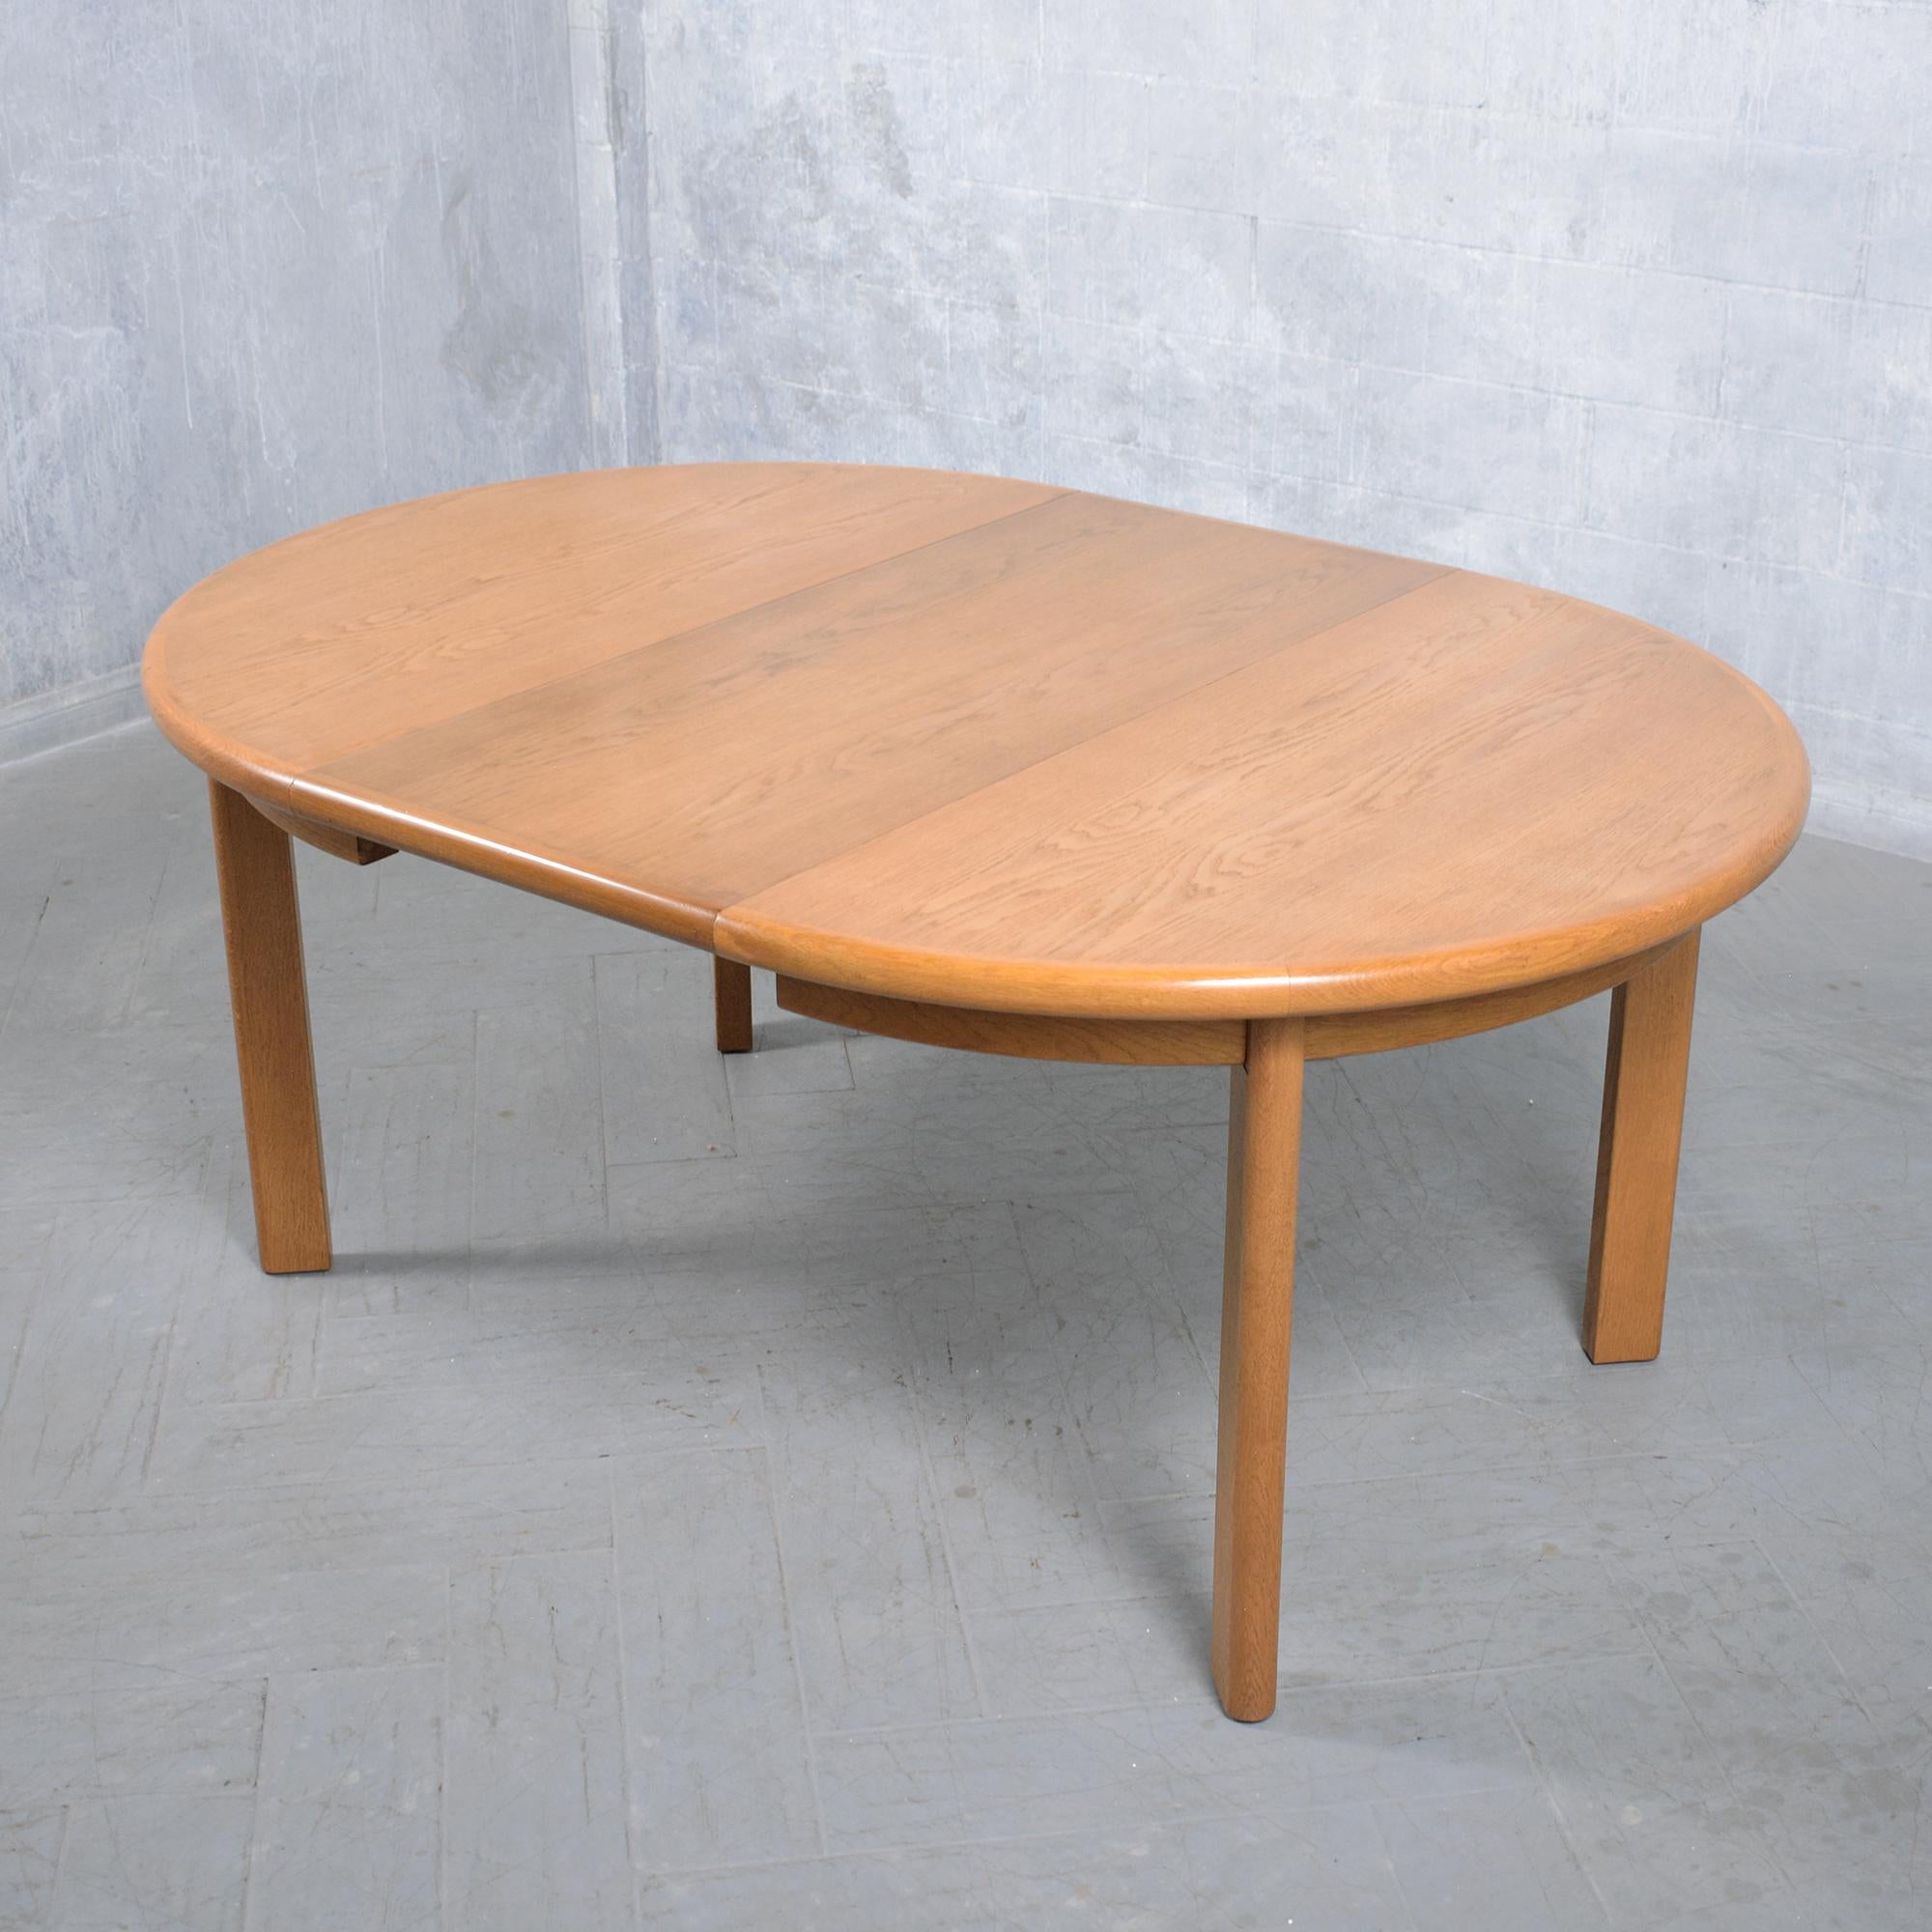 1970s Danish Modern Teak Dining Table with Extendable Leaves For Sale 11